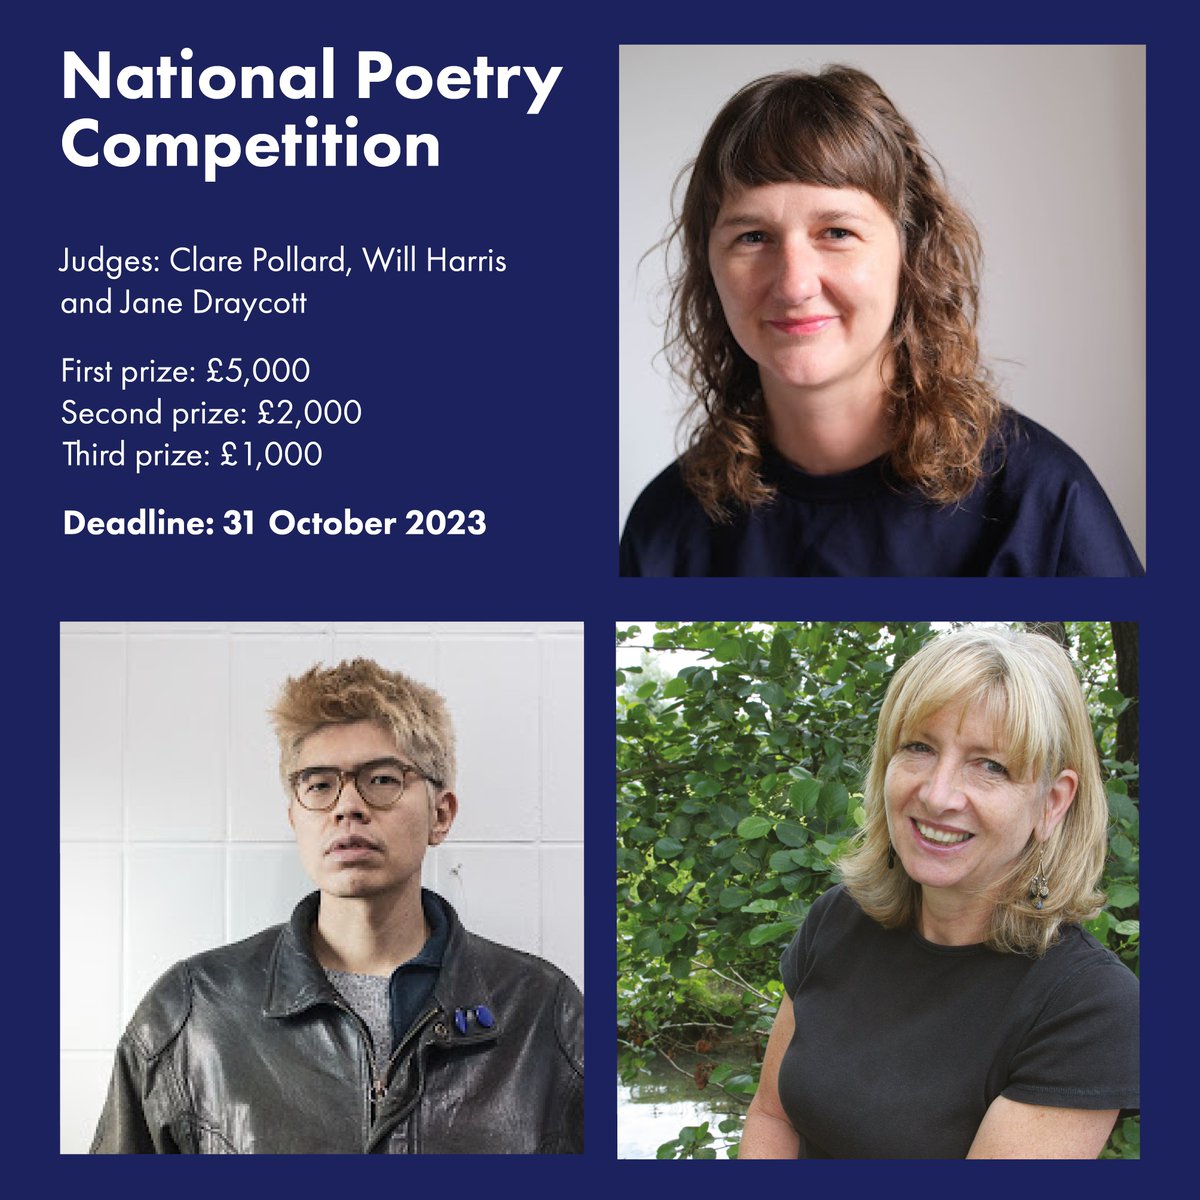 Enter the #NationalPoetryCompetition 2023

Deadline: 31st October. First Prize: £5,000.
Judges: Will Harris, Clare Pollard and Jane Draycott.

Enter here: npc.poetrysociety.org.uk